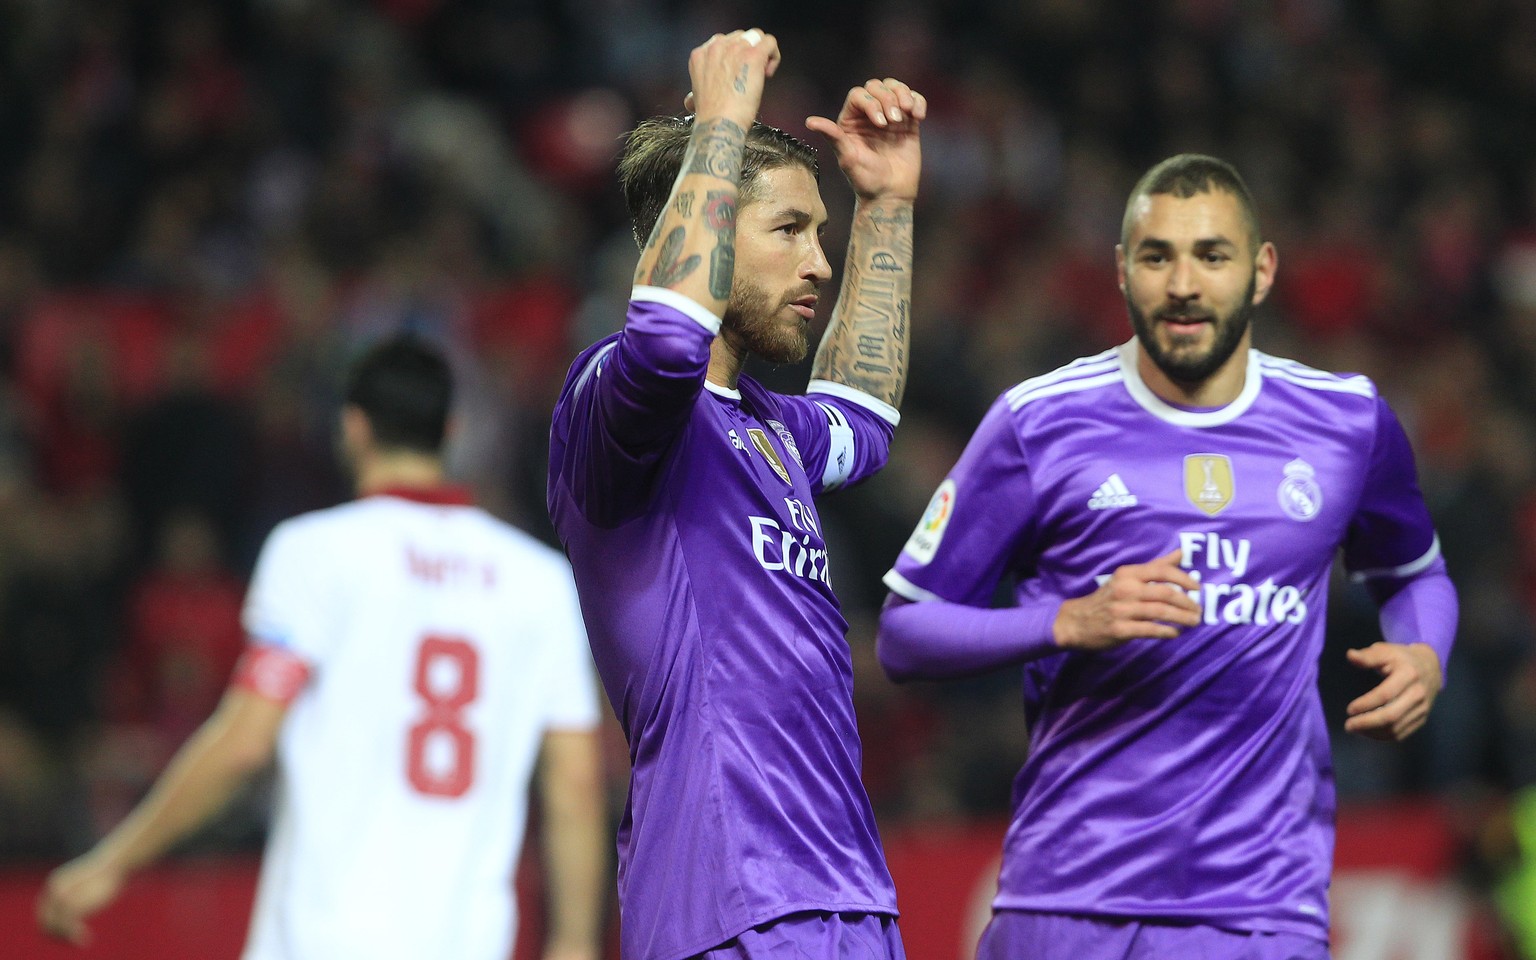 Real Madrid&#039;s Sergio Ramos celebrates after scoring against Sevilla during a Spain&#039;s King&#039;s Cup soccer match between Real Madrid and Sevilla at the Ramon Sanchez Pizjuan stadium, in Sev ...